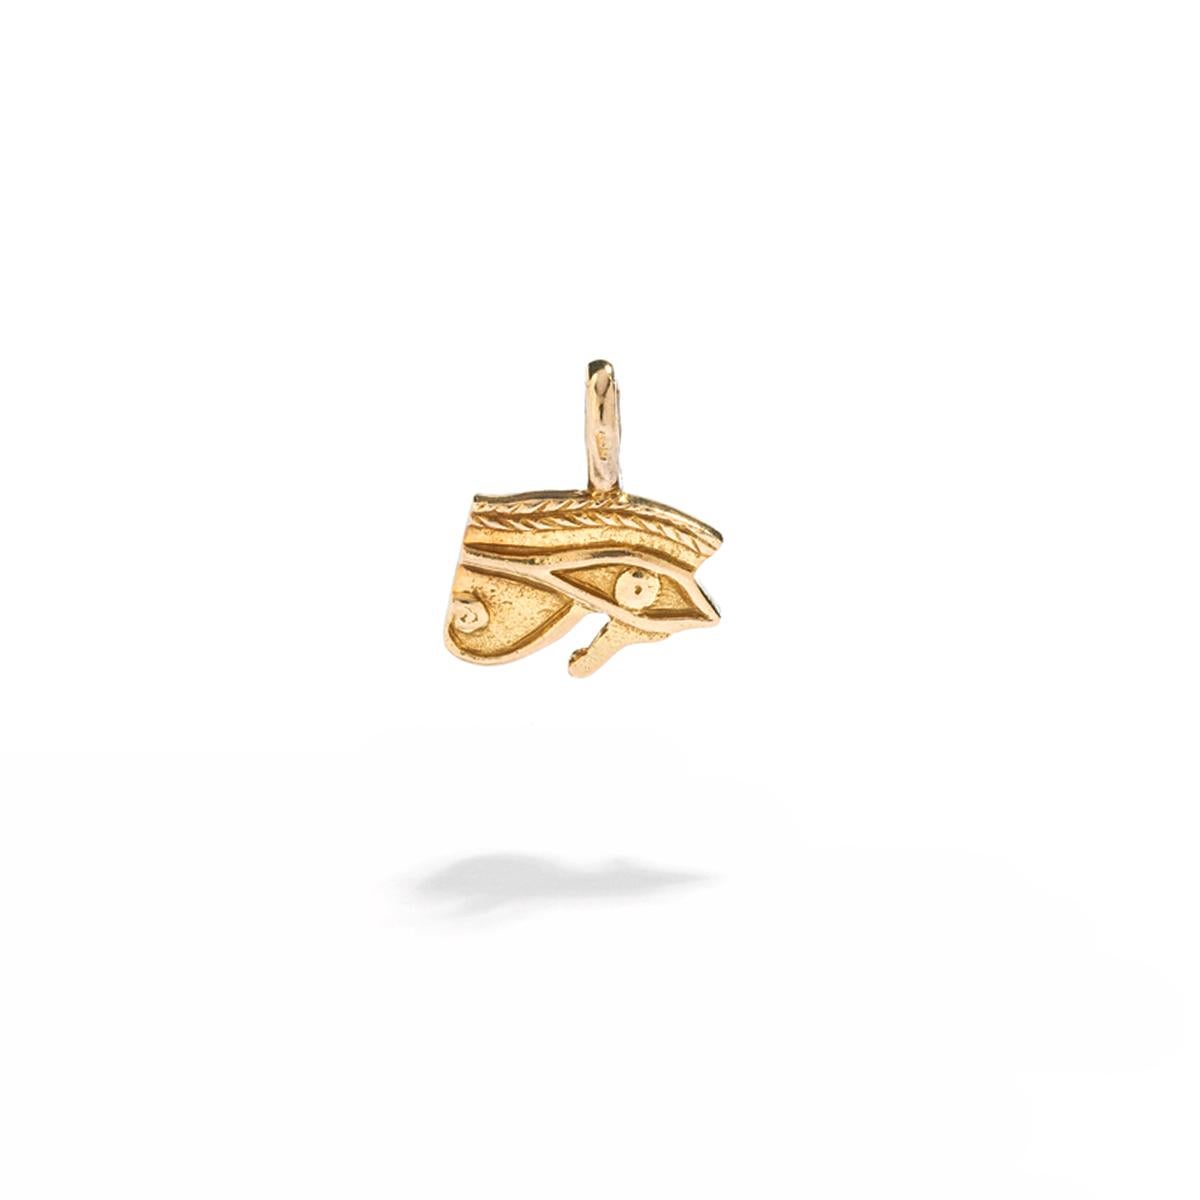 Egyptian hieroglyphic symbol Yellow gold 18k Pendant Charm. 
Egyptian Revival.

Total height: 0.59 inch (1.50 centimeters) including bail.
Total width: 0.47 inch (1.20 centimeters).
Total weight: 1.65 grams.